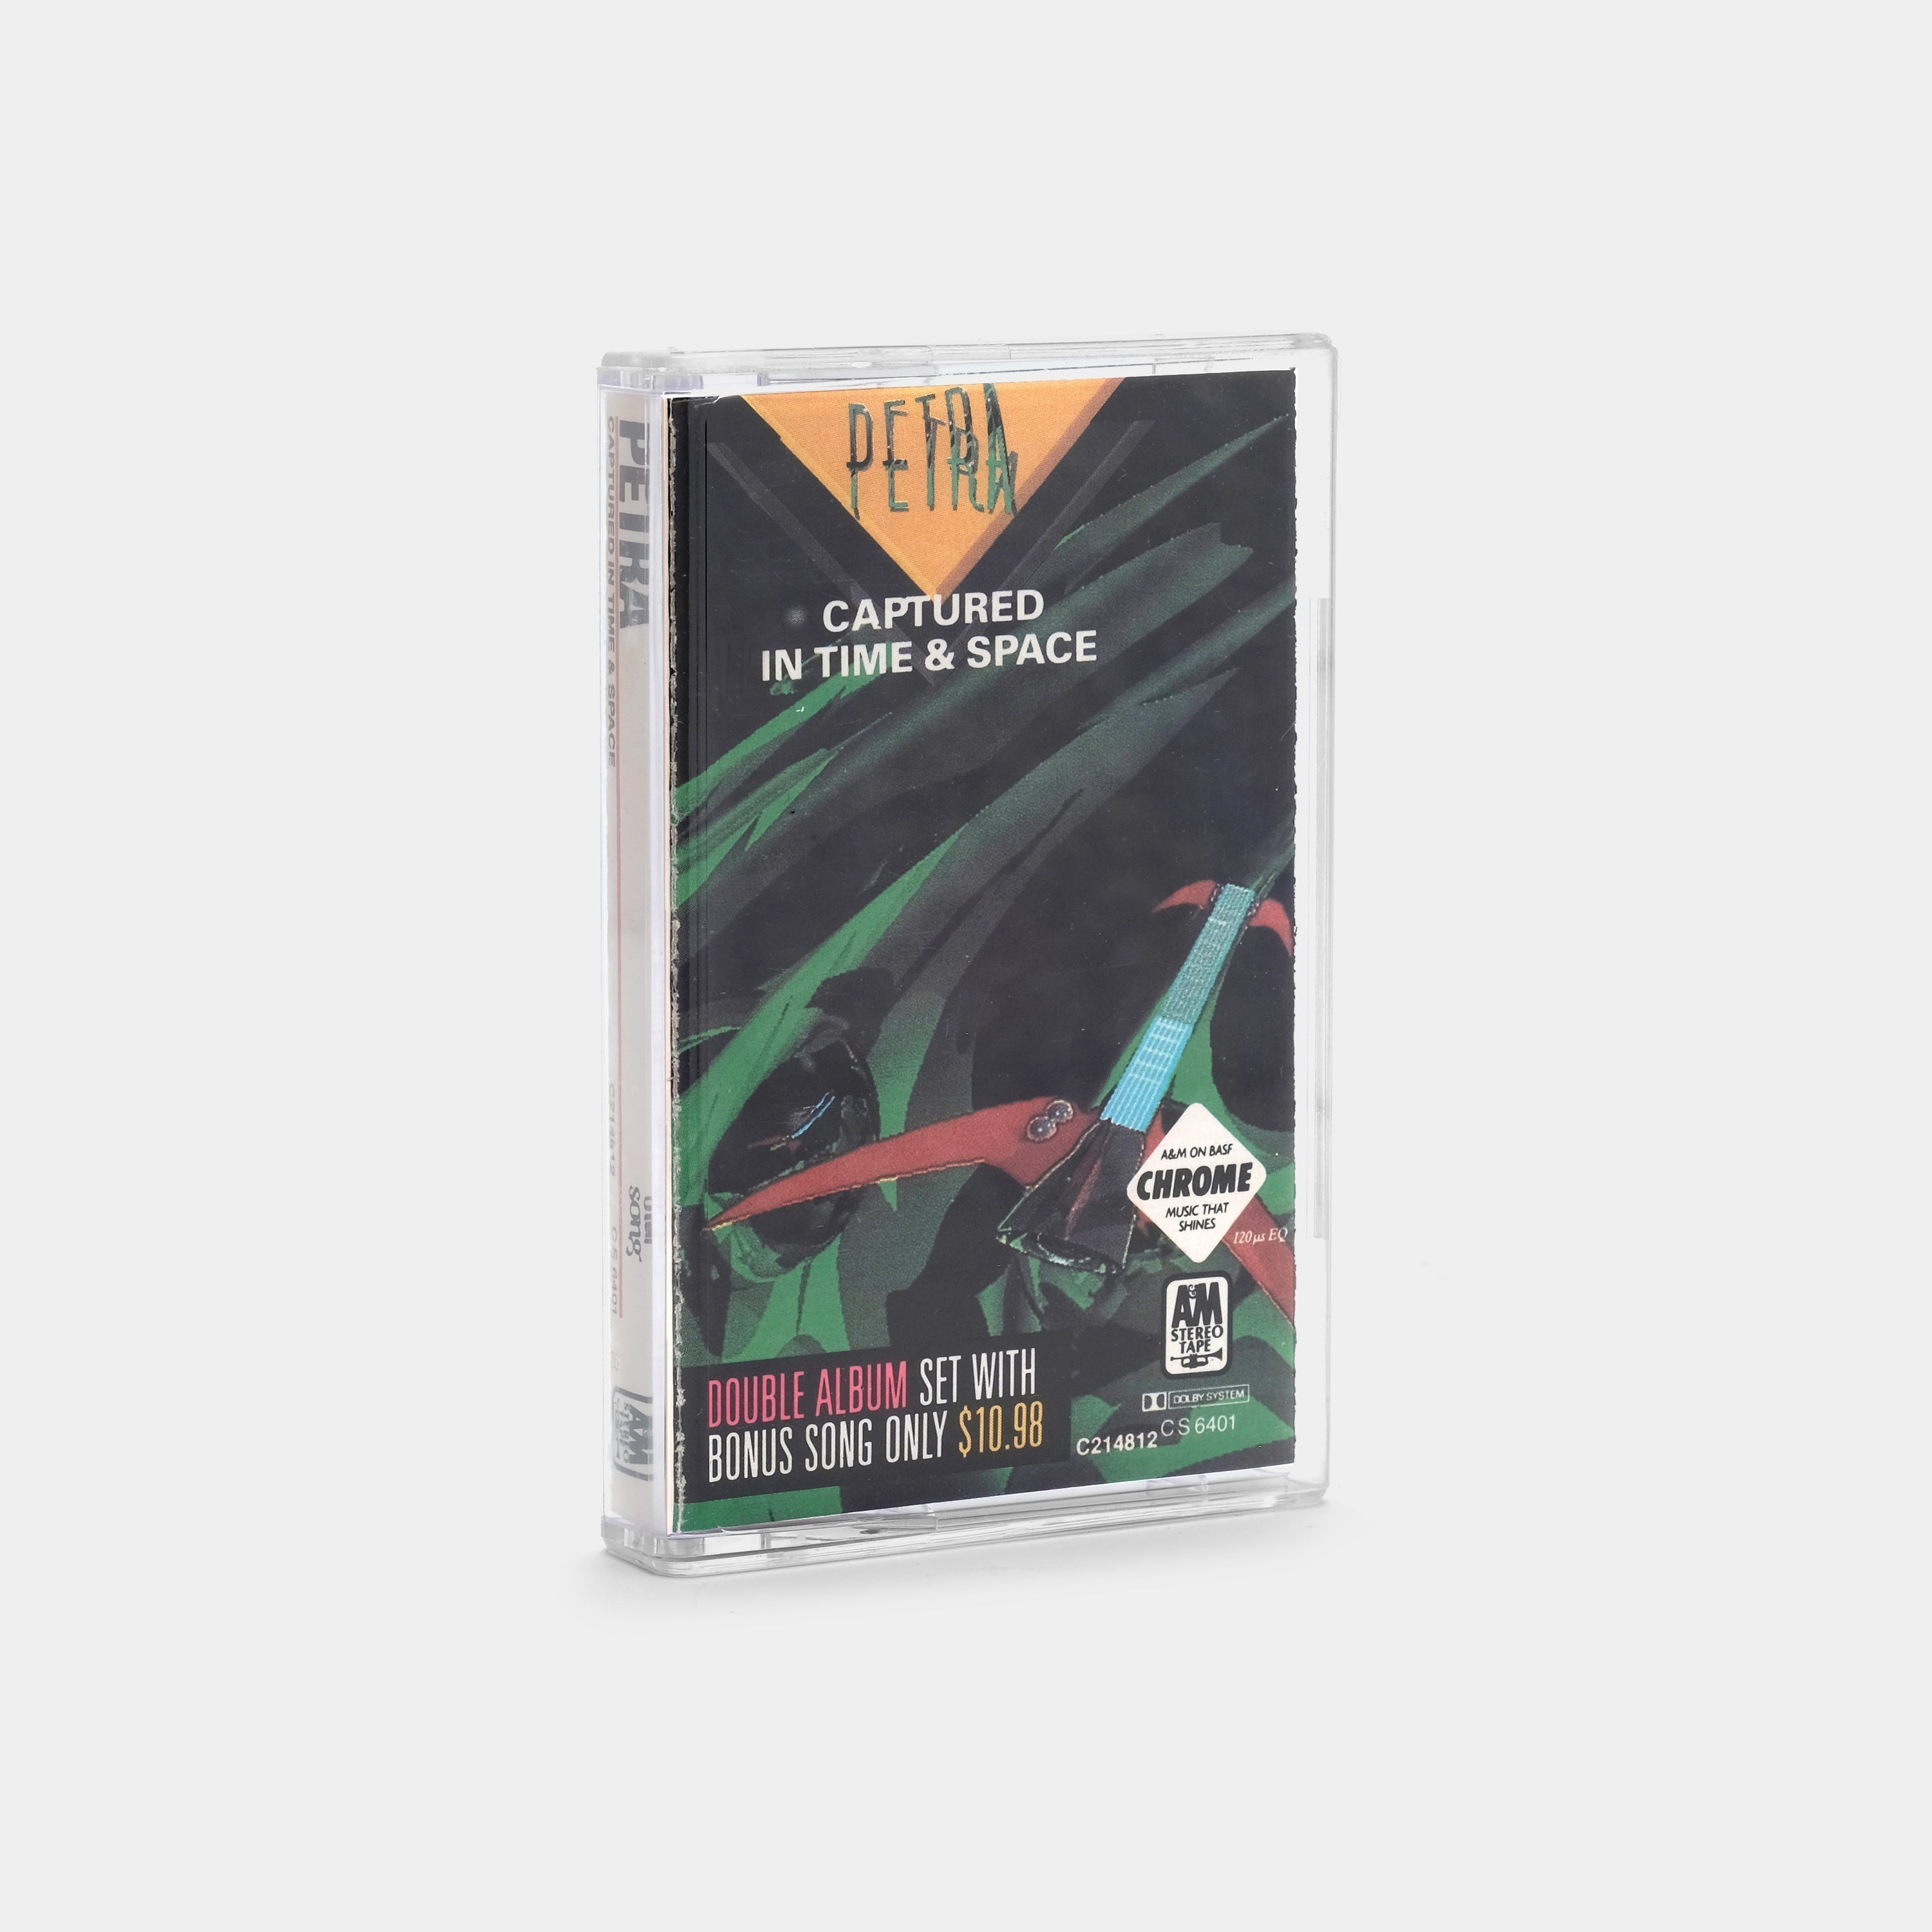 Petra - Captured in Time & Space Cassette Tape